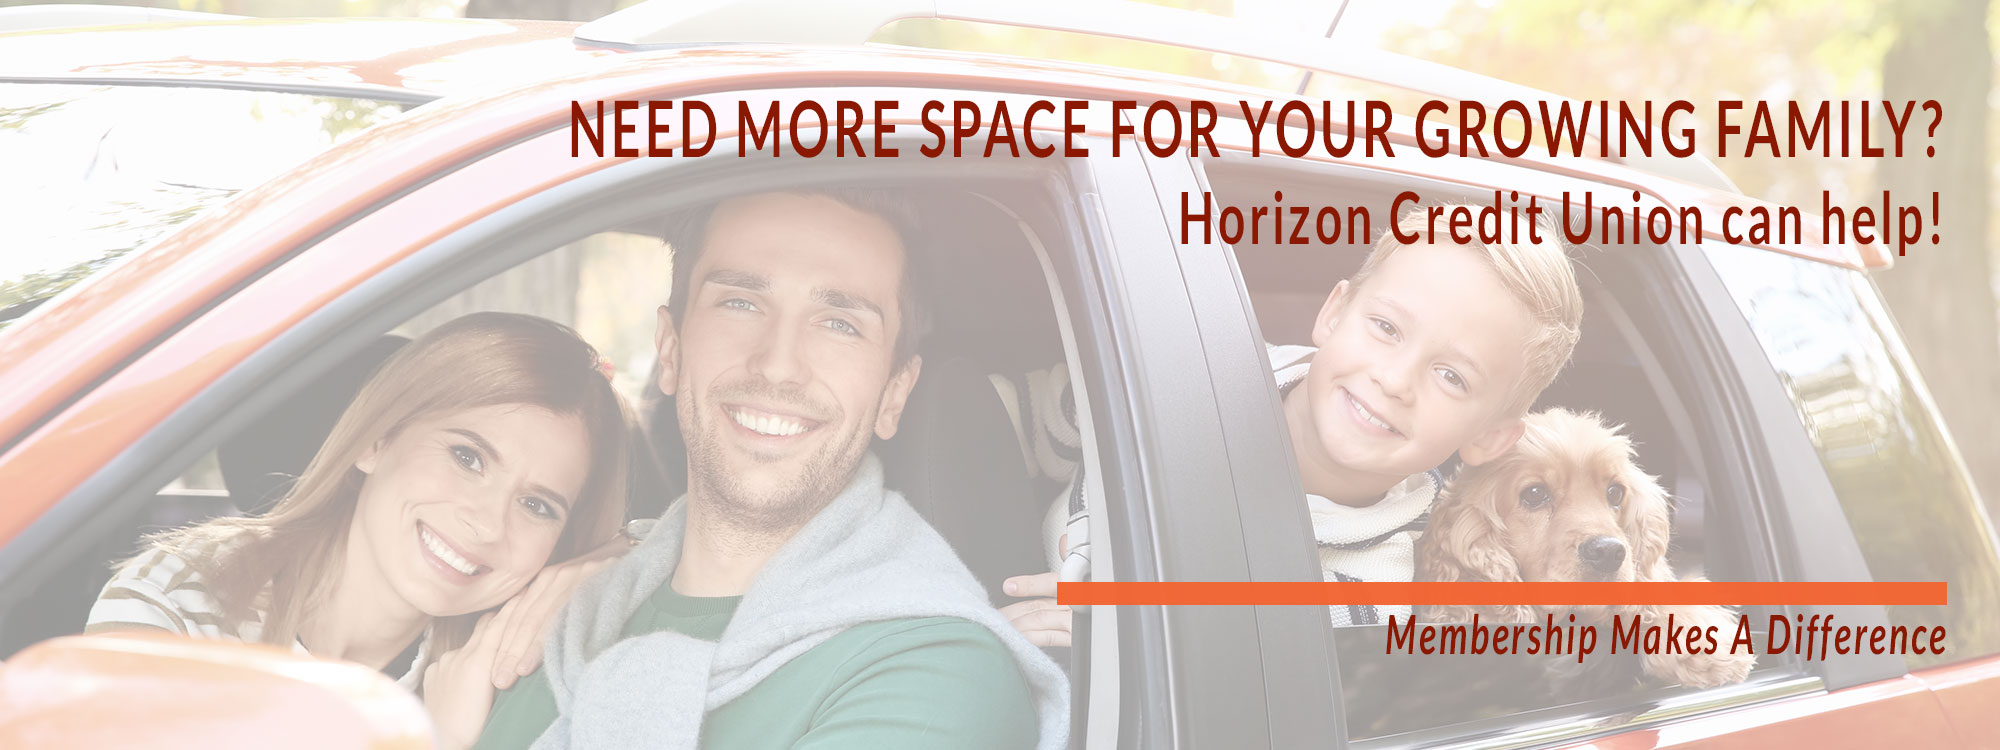 Need more space for your growing family? Horizon Credit Union can help! Membership Makes a Difference.